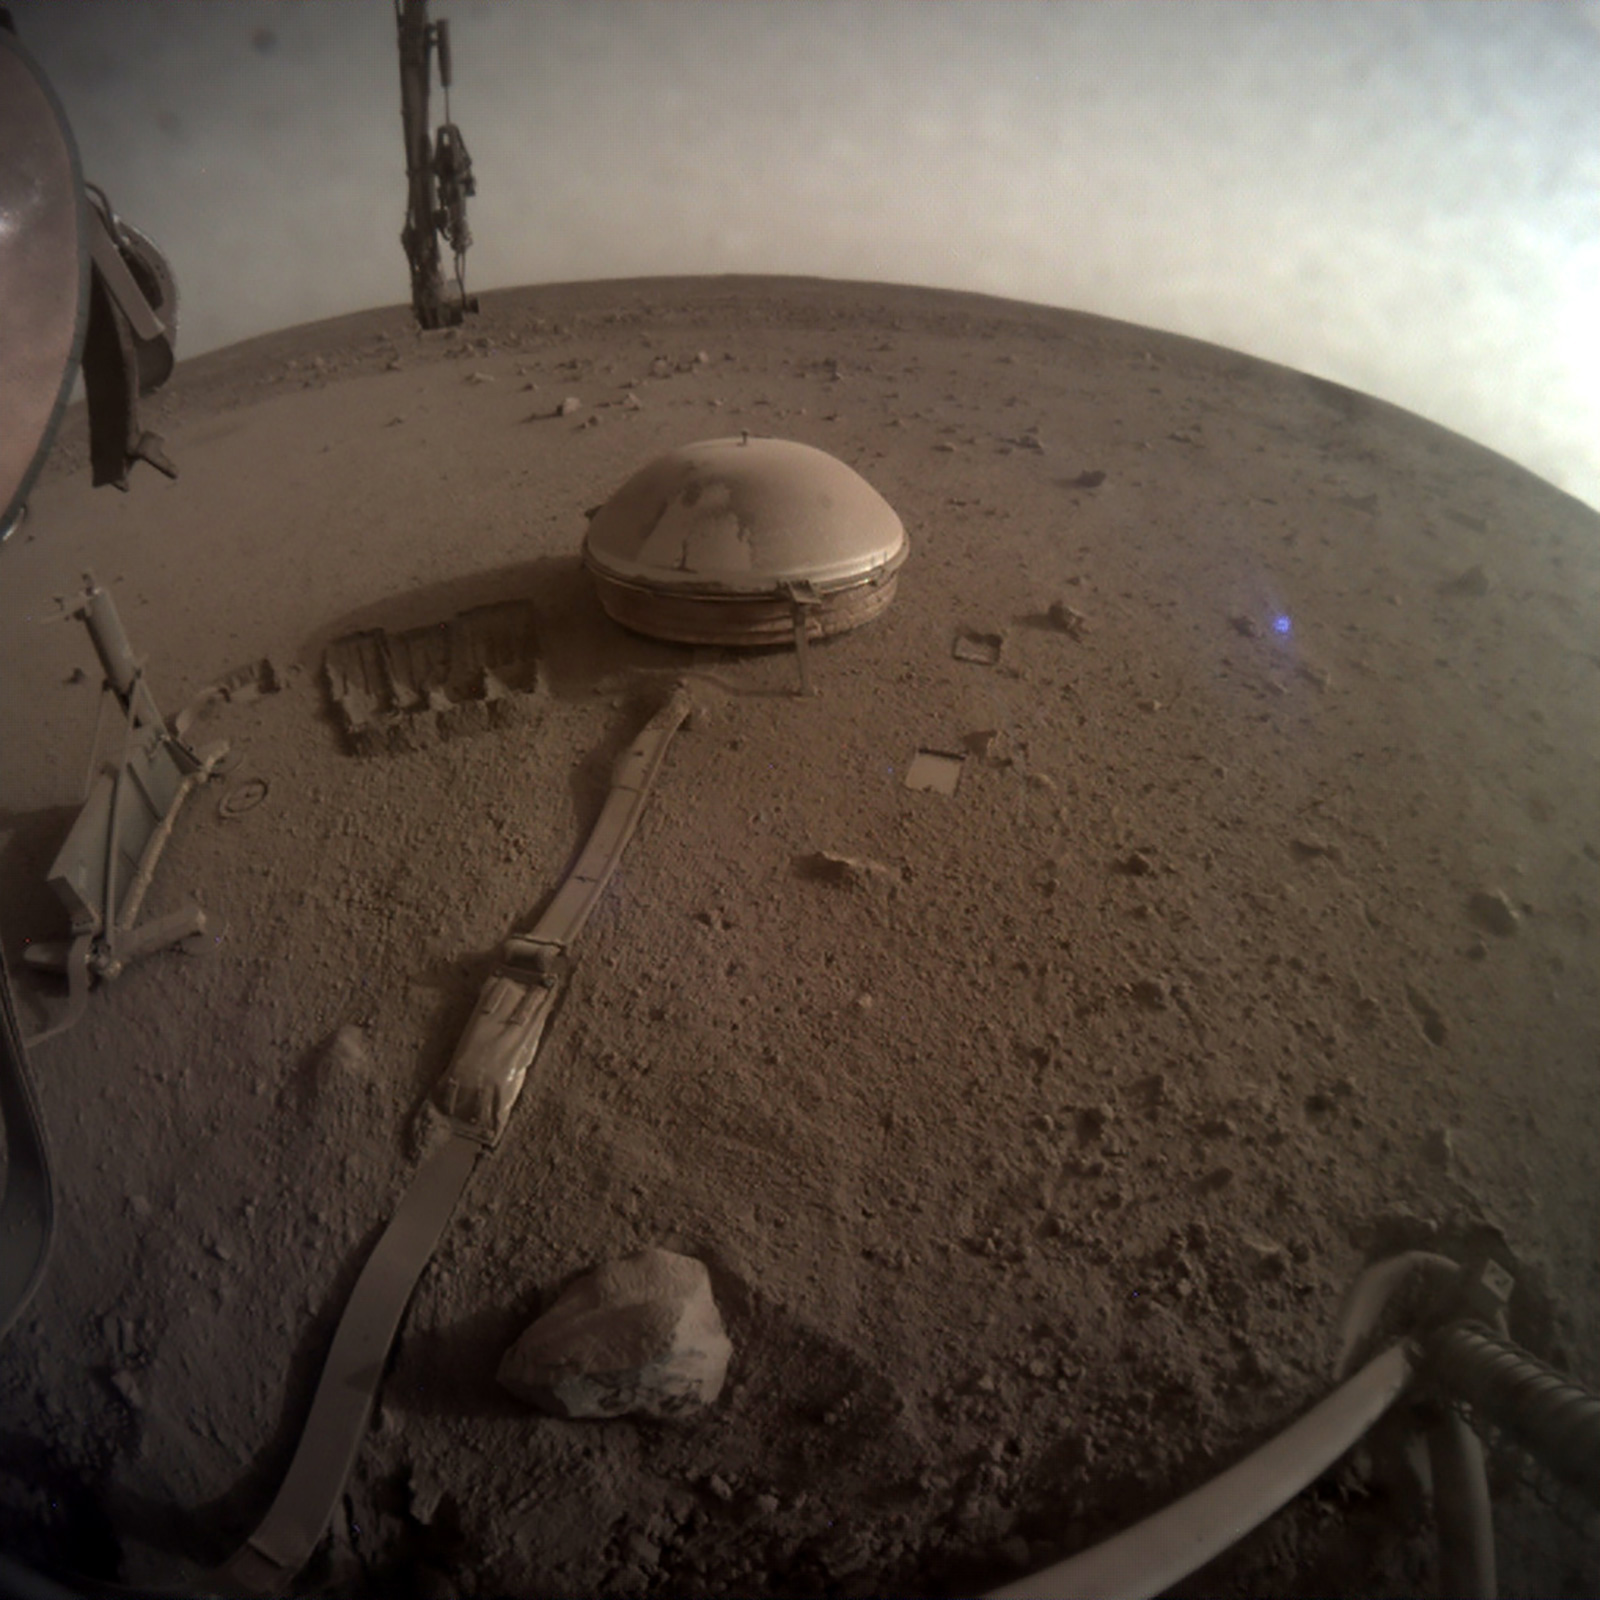 NASA released what would become the last photo from the Mars InSight lander on December 19. The space agency announced the official <a href="https://www.cnn.com/2022/12/21/world/nasa-insight-mars-mission-end-scn/index.html" target="_blank">end</a> of the mission on December 21 after the lander failed to respond to two messages from mission control at NASA’s Jet Propulsion Laboratory in Pasadena, California.